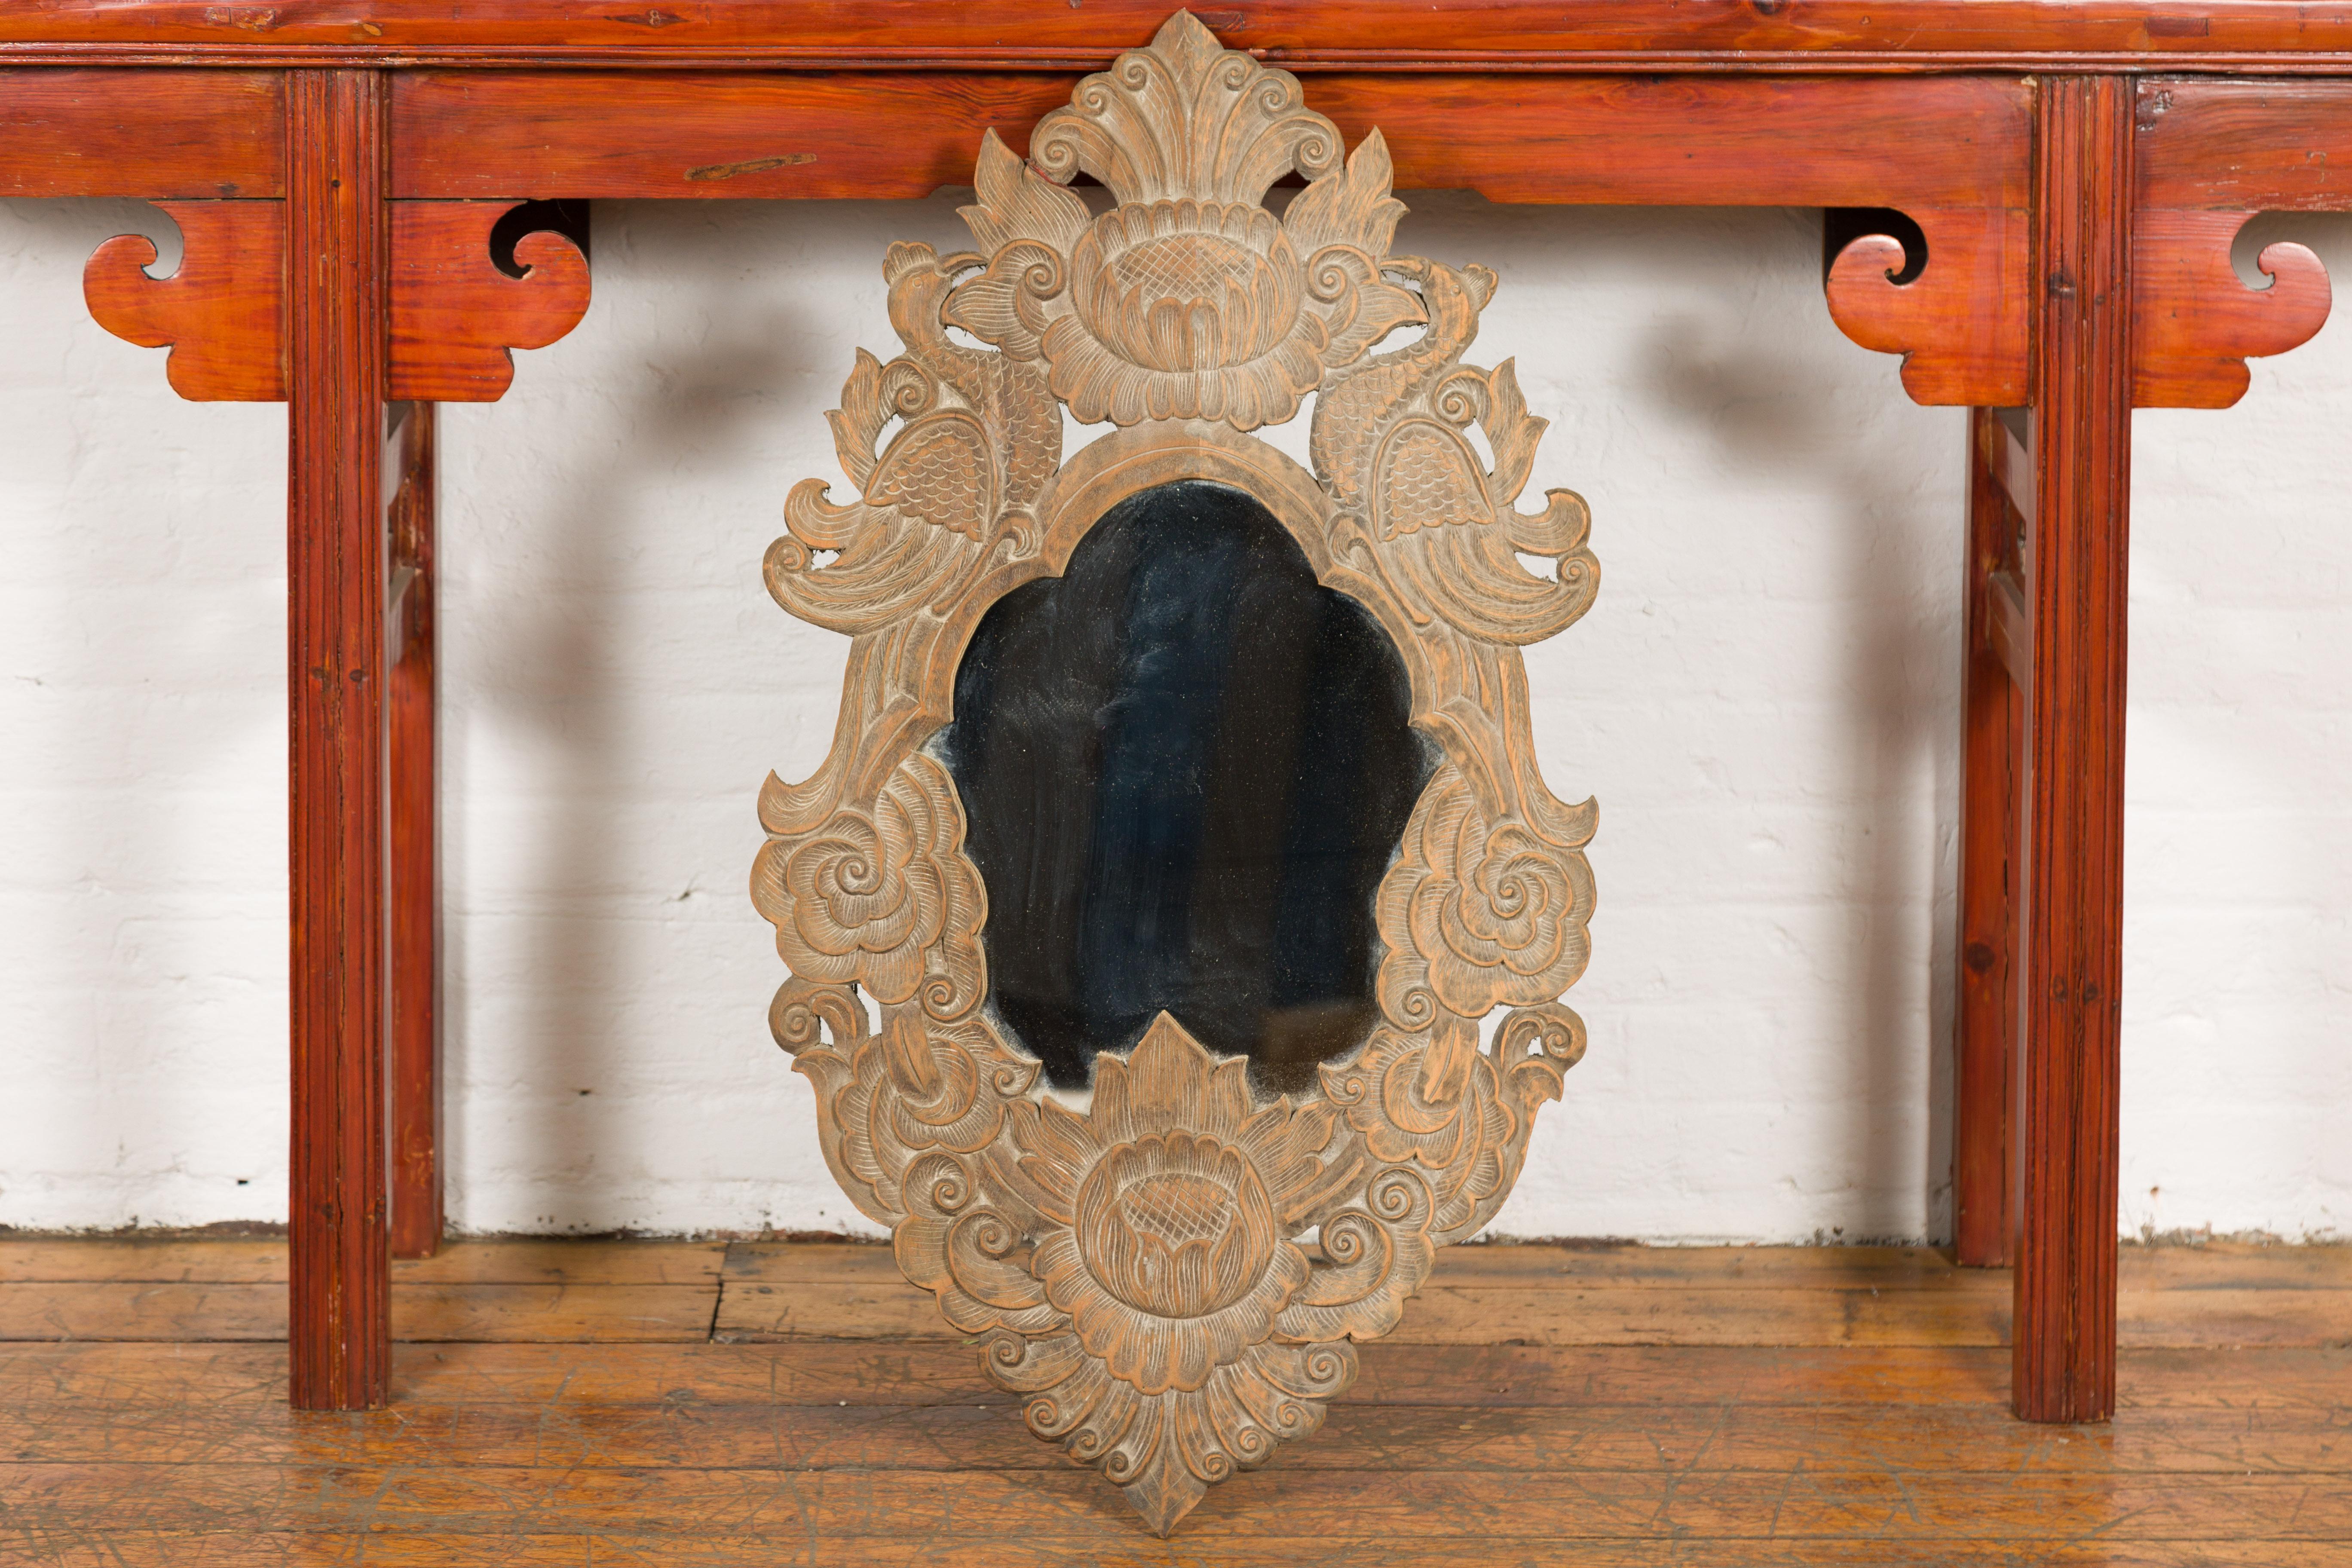 Vintage Thai Wooden Mirror with Carved Bird, Foliage and Flower Motifs In Good Condition For Sale In Yonkers, NY